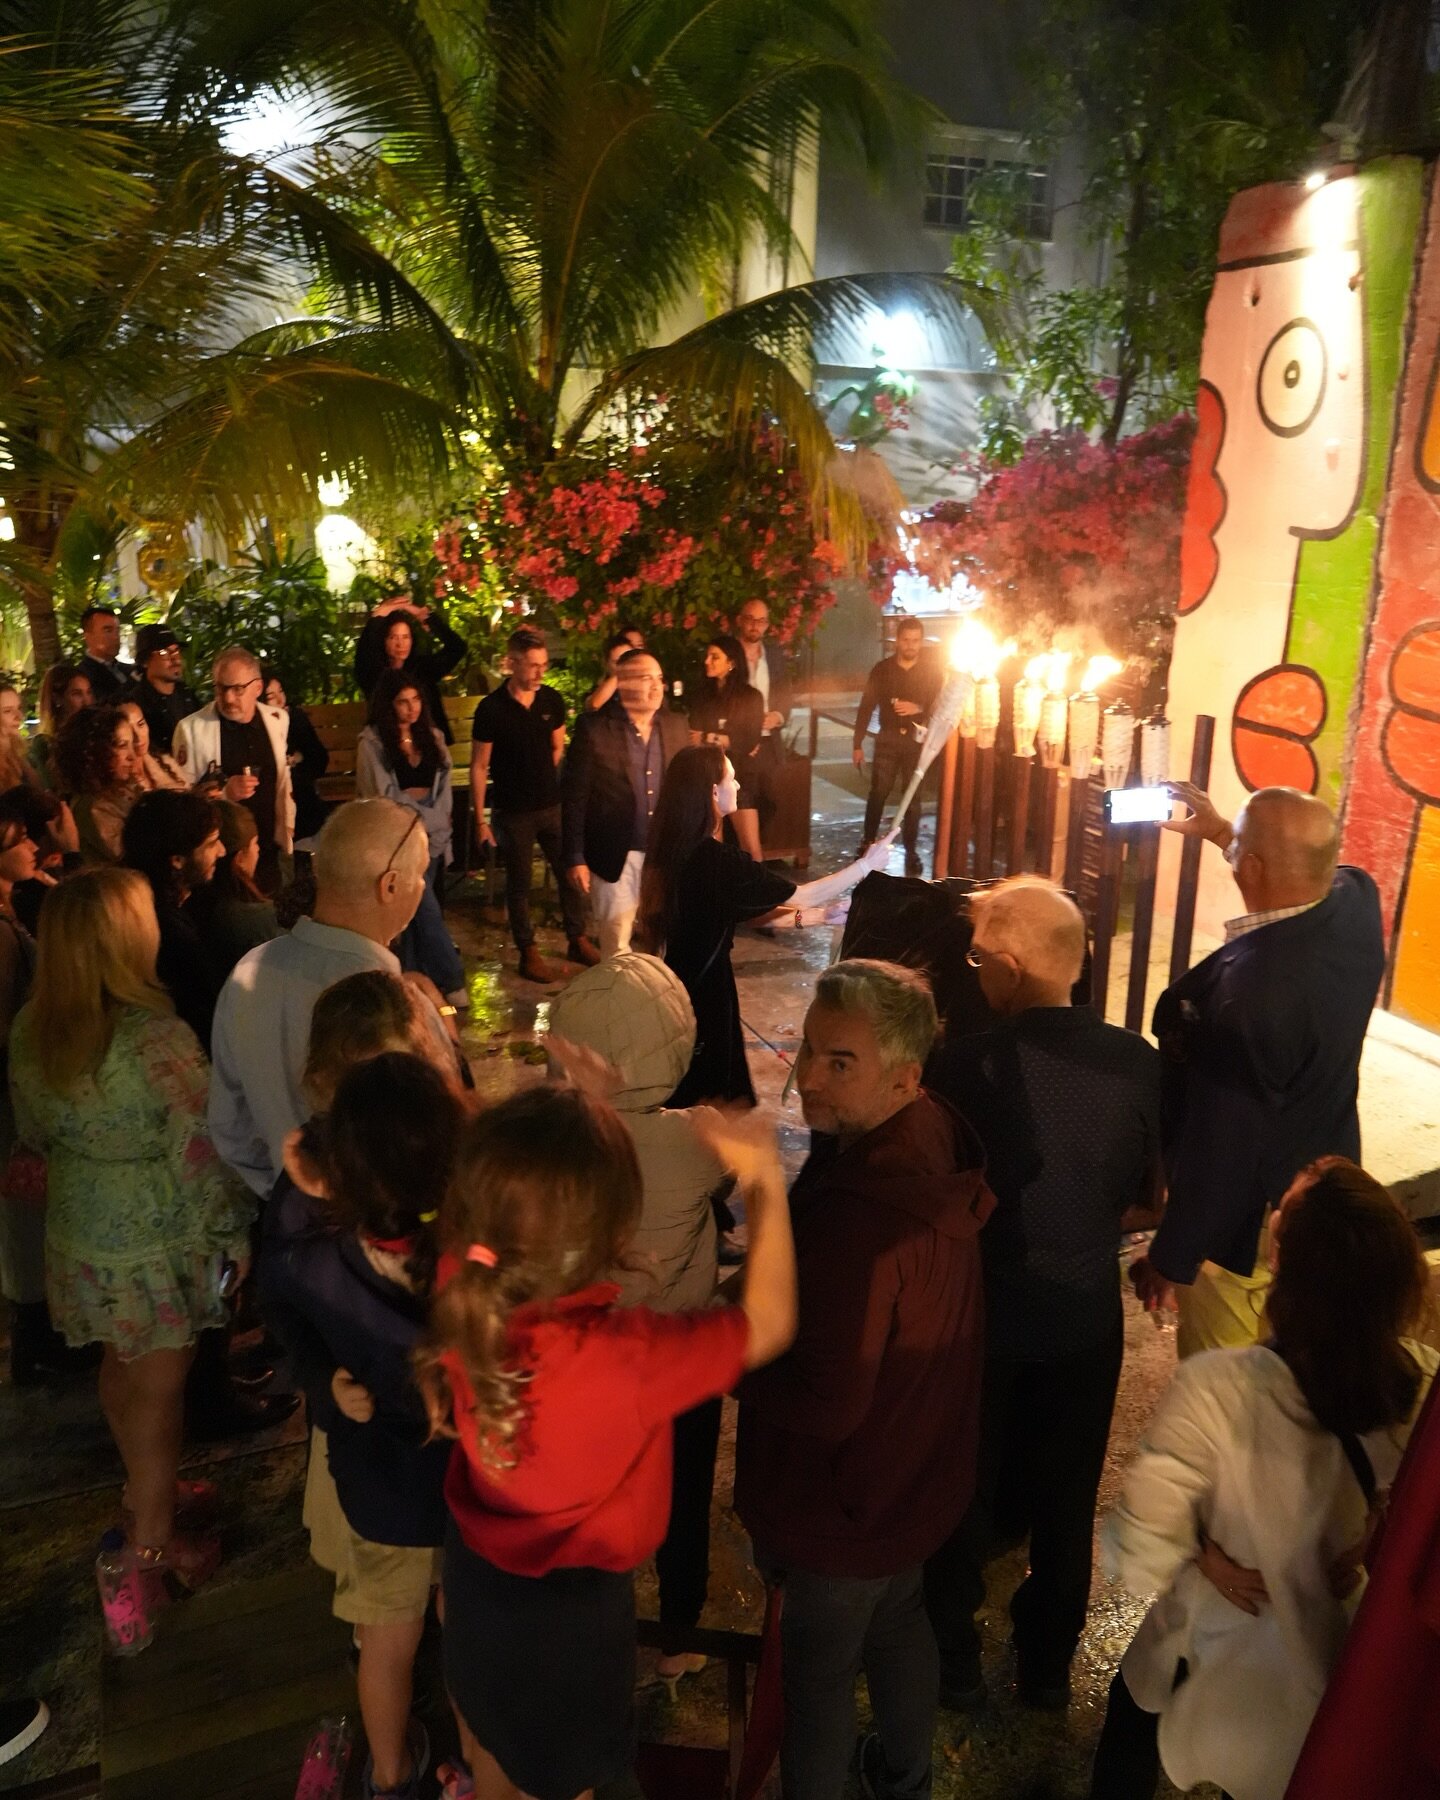 Thank you, Miami Ironside @miamiironside , for the amazing Hanukkah celebrations and beautiful candle lighting.

#photography by
@beautybymatt_

#art4causes #artforacause #artauction #standwithisrael